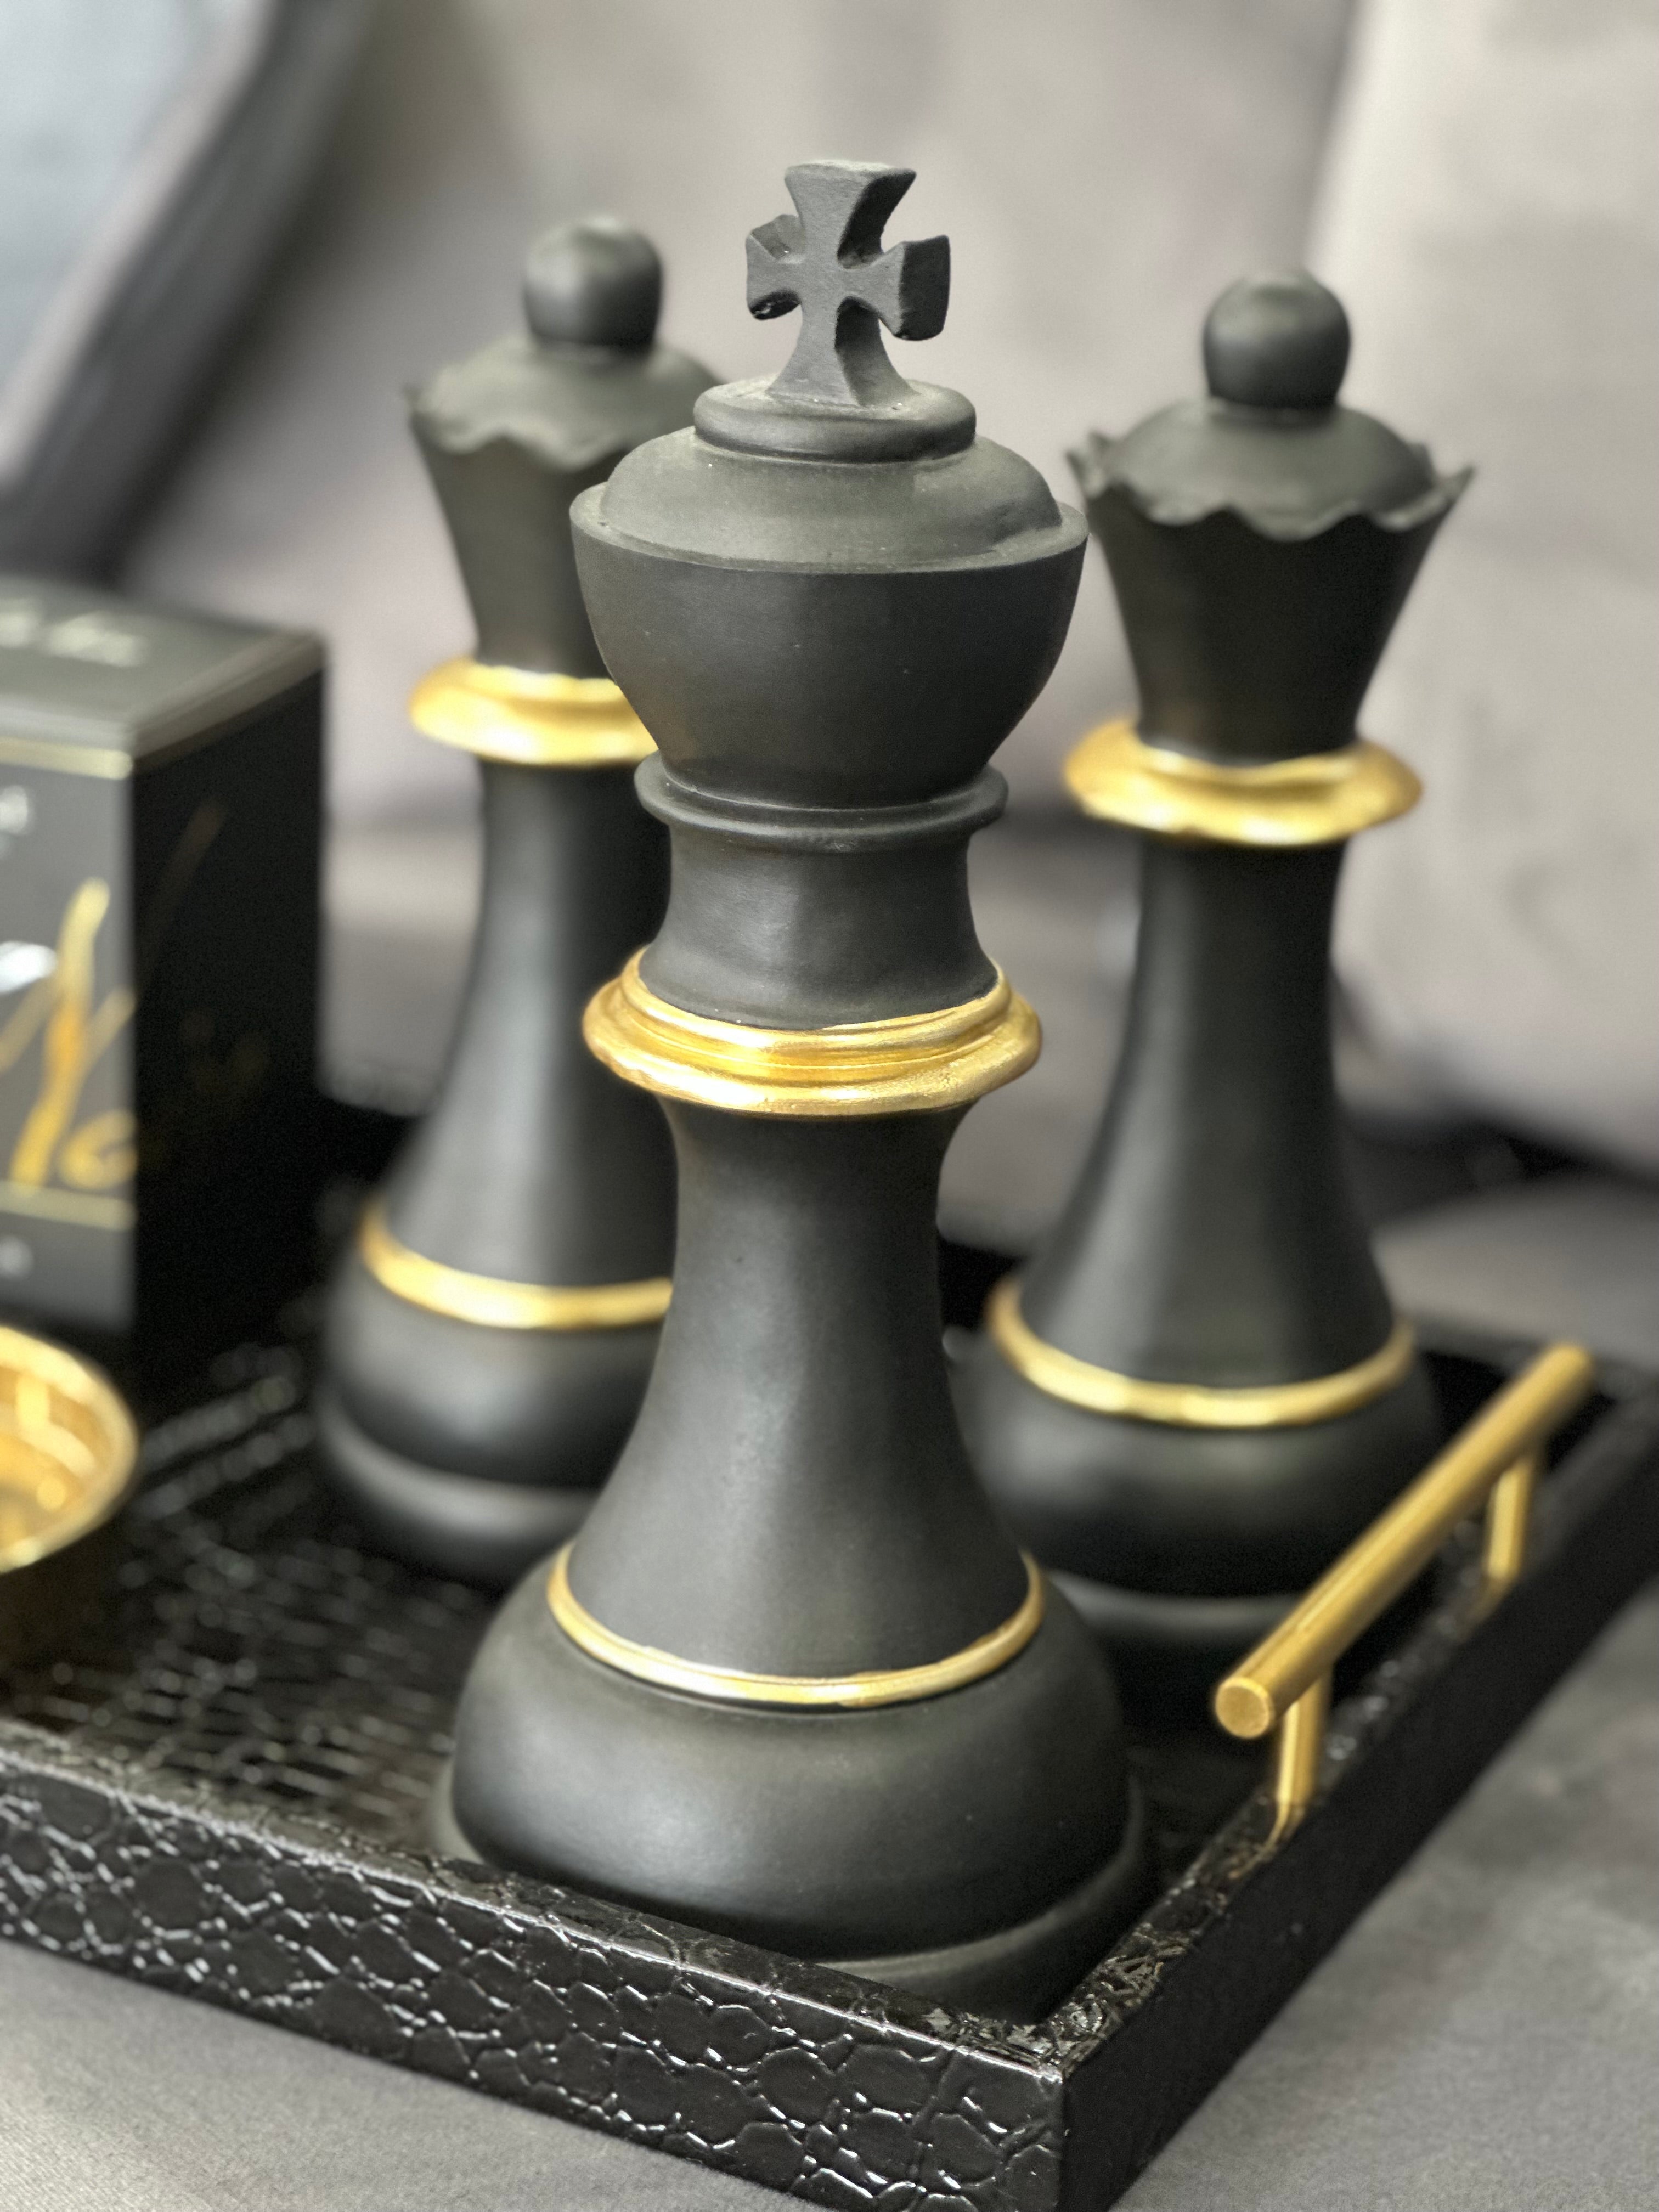 Black and Gold King Chess Piece Ornament